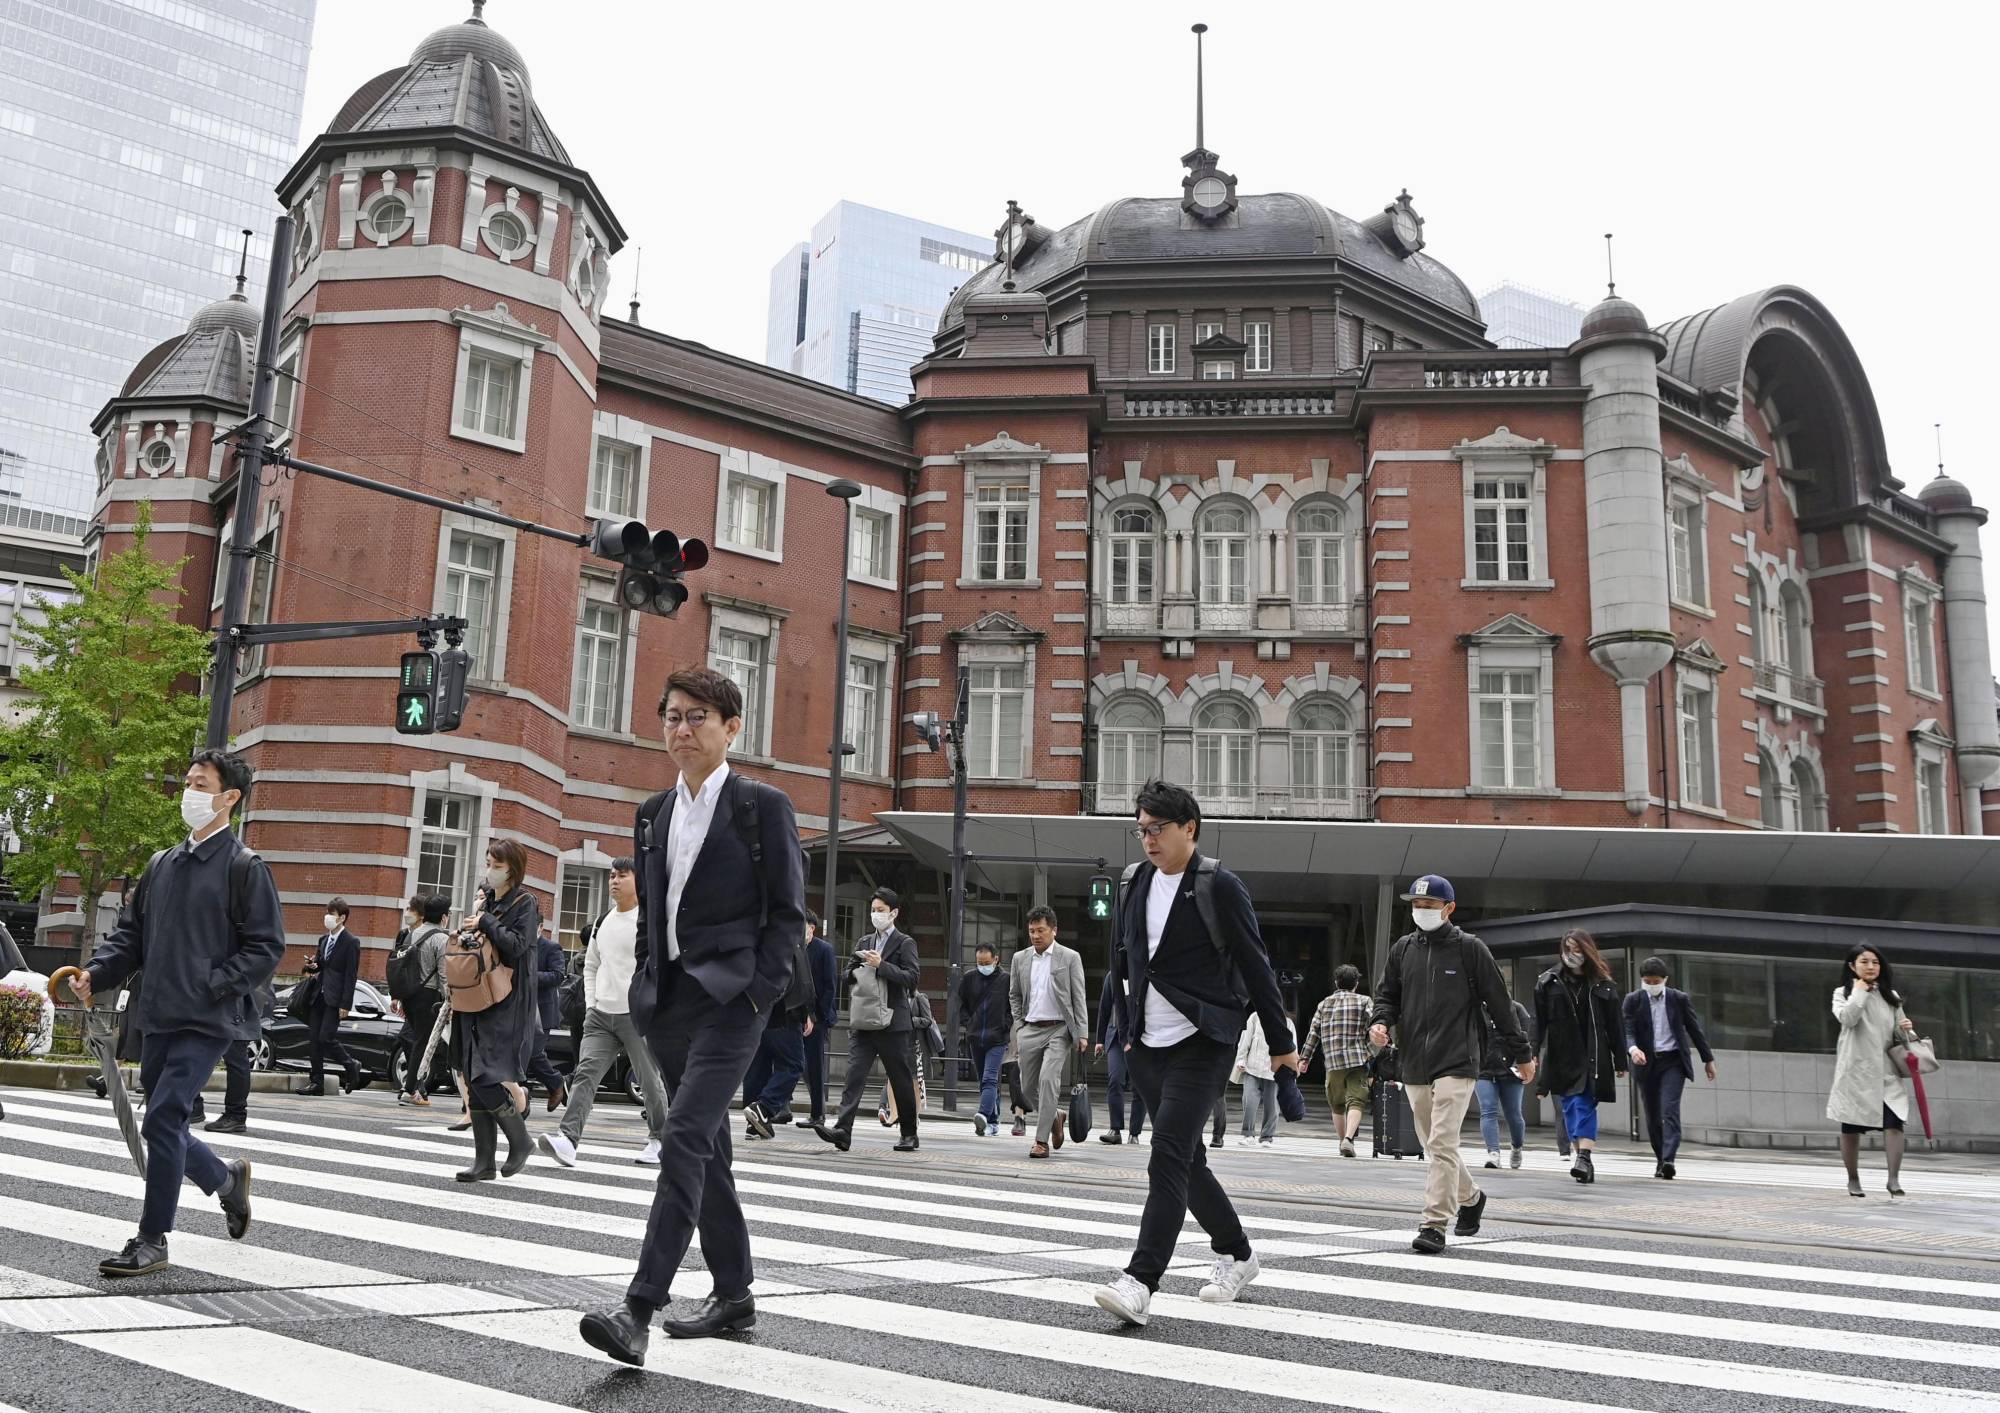 Japan's economy expanded an annualized 1.6% in the January-March period to mark the first increase in three quarters, data showed on Wednesday, as a post-COVID rebound in consumption offset global headwinds. | KYODO